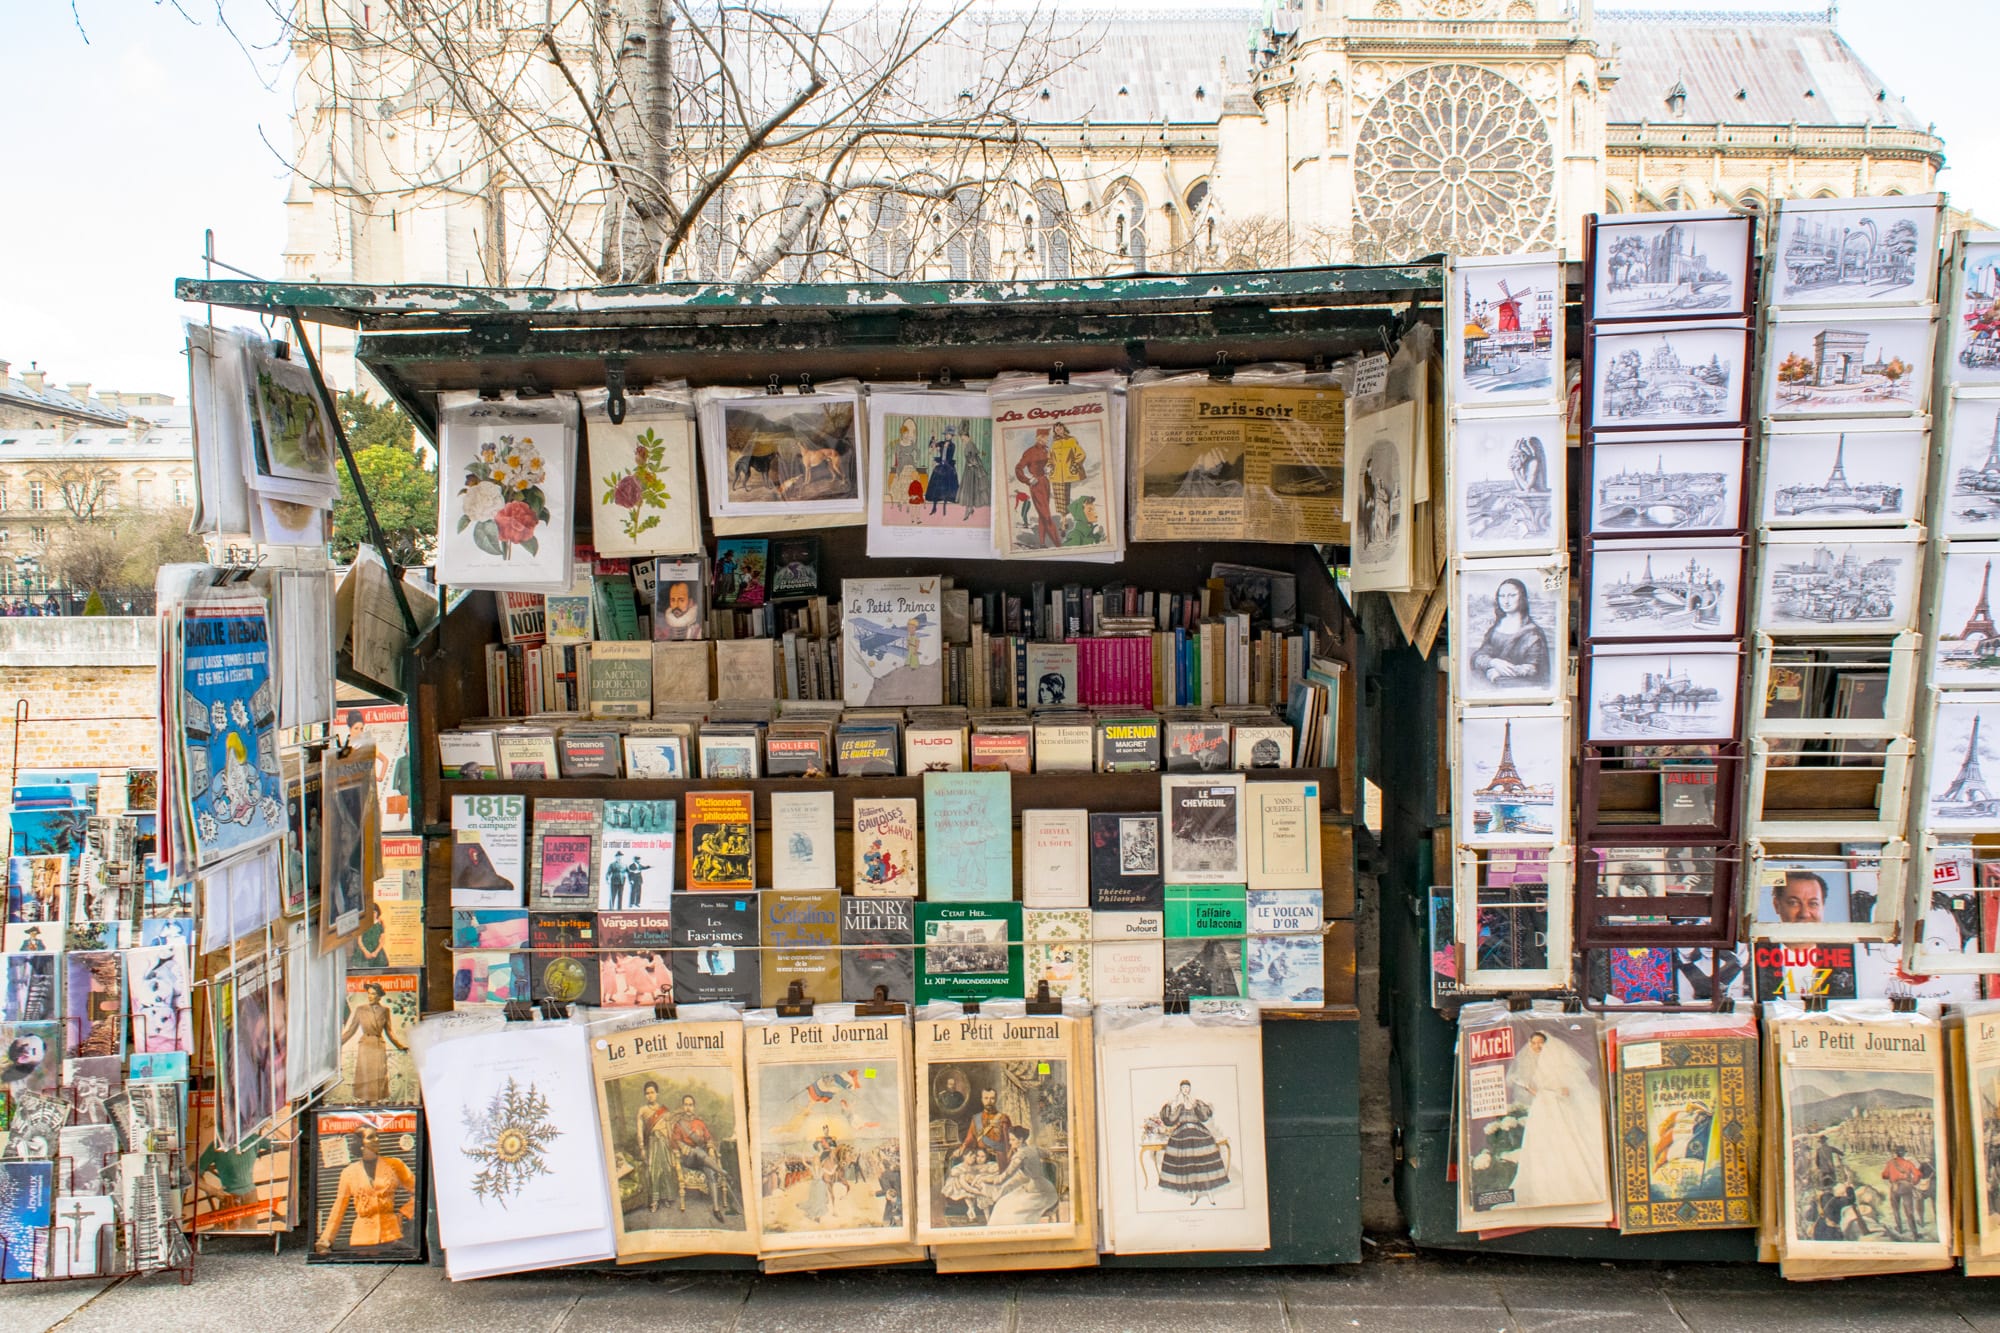 Second Trip to Paris: Books on Banks of the Seine